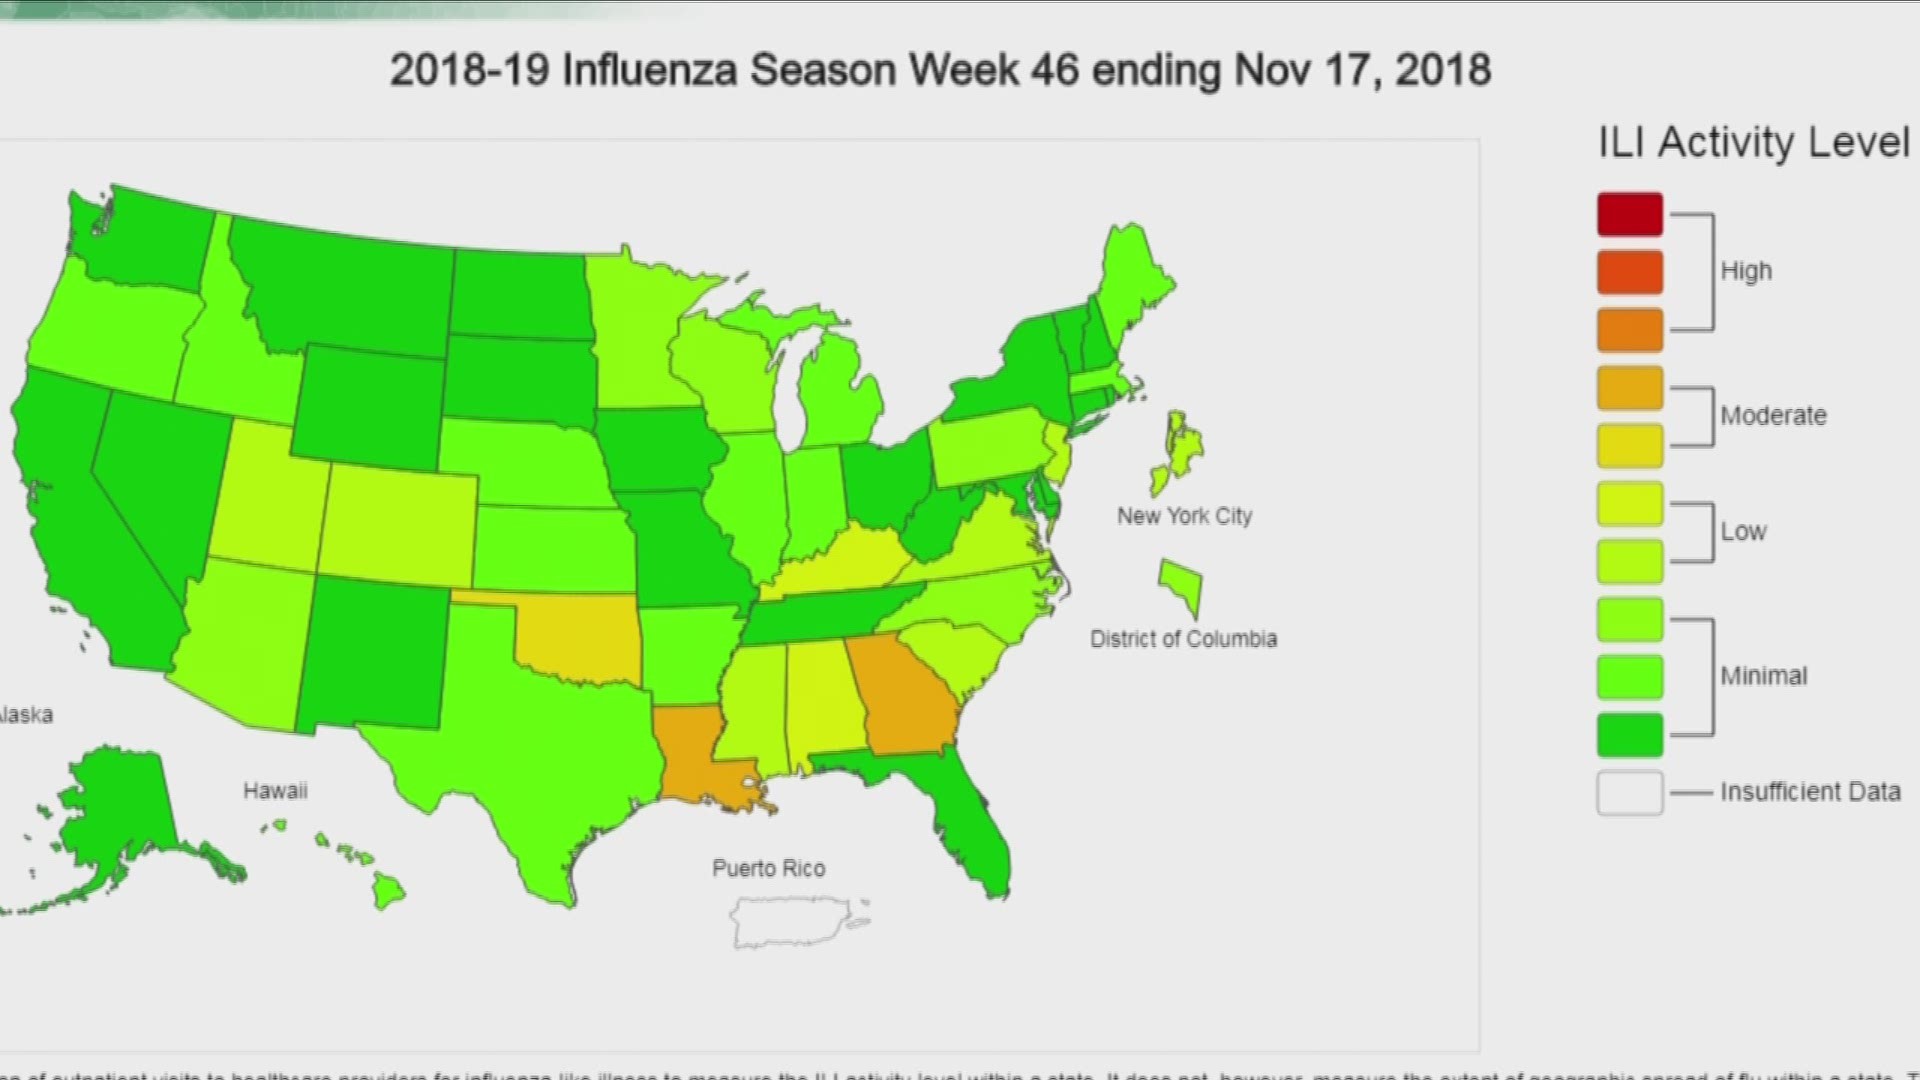 Here in Knox County -- the health department says it's seeing some flu activity. It expects flu cases to increase in the coming weeks.